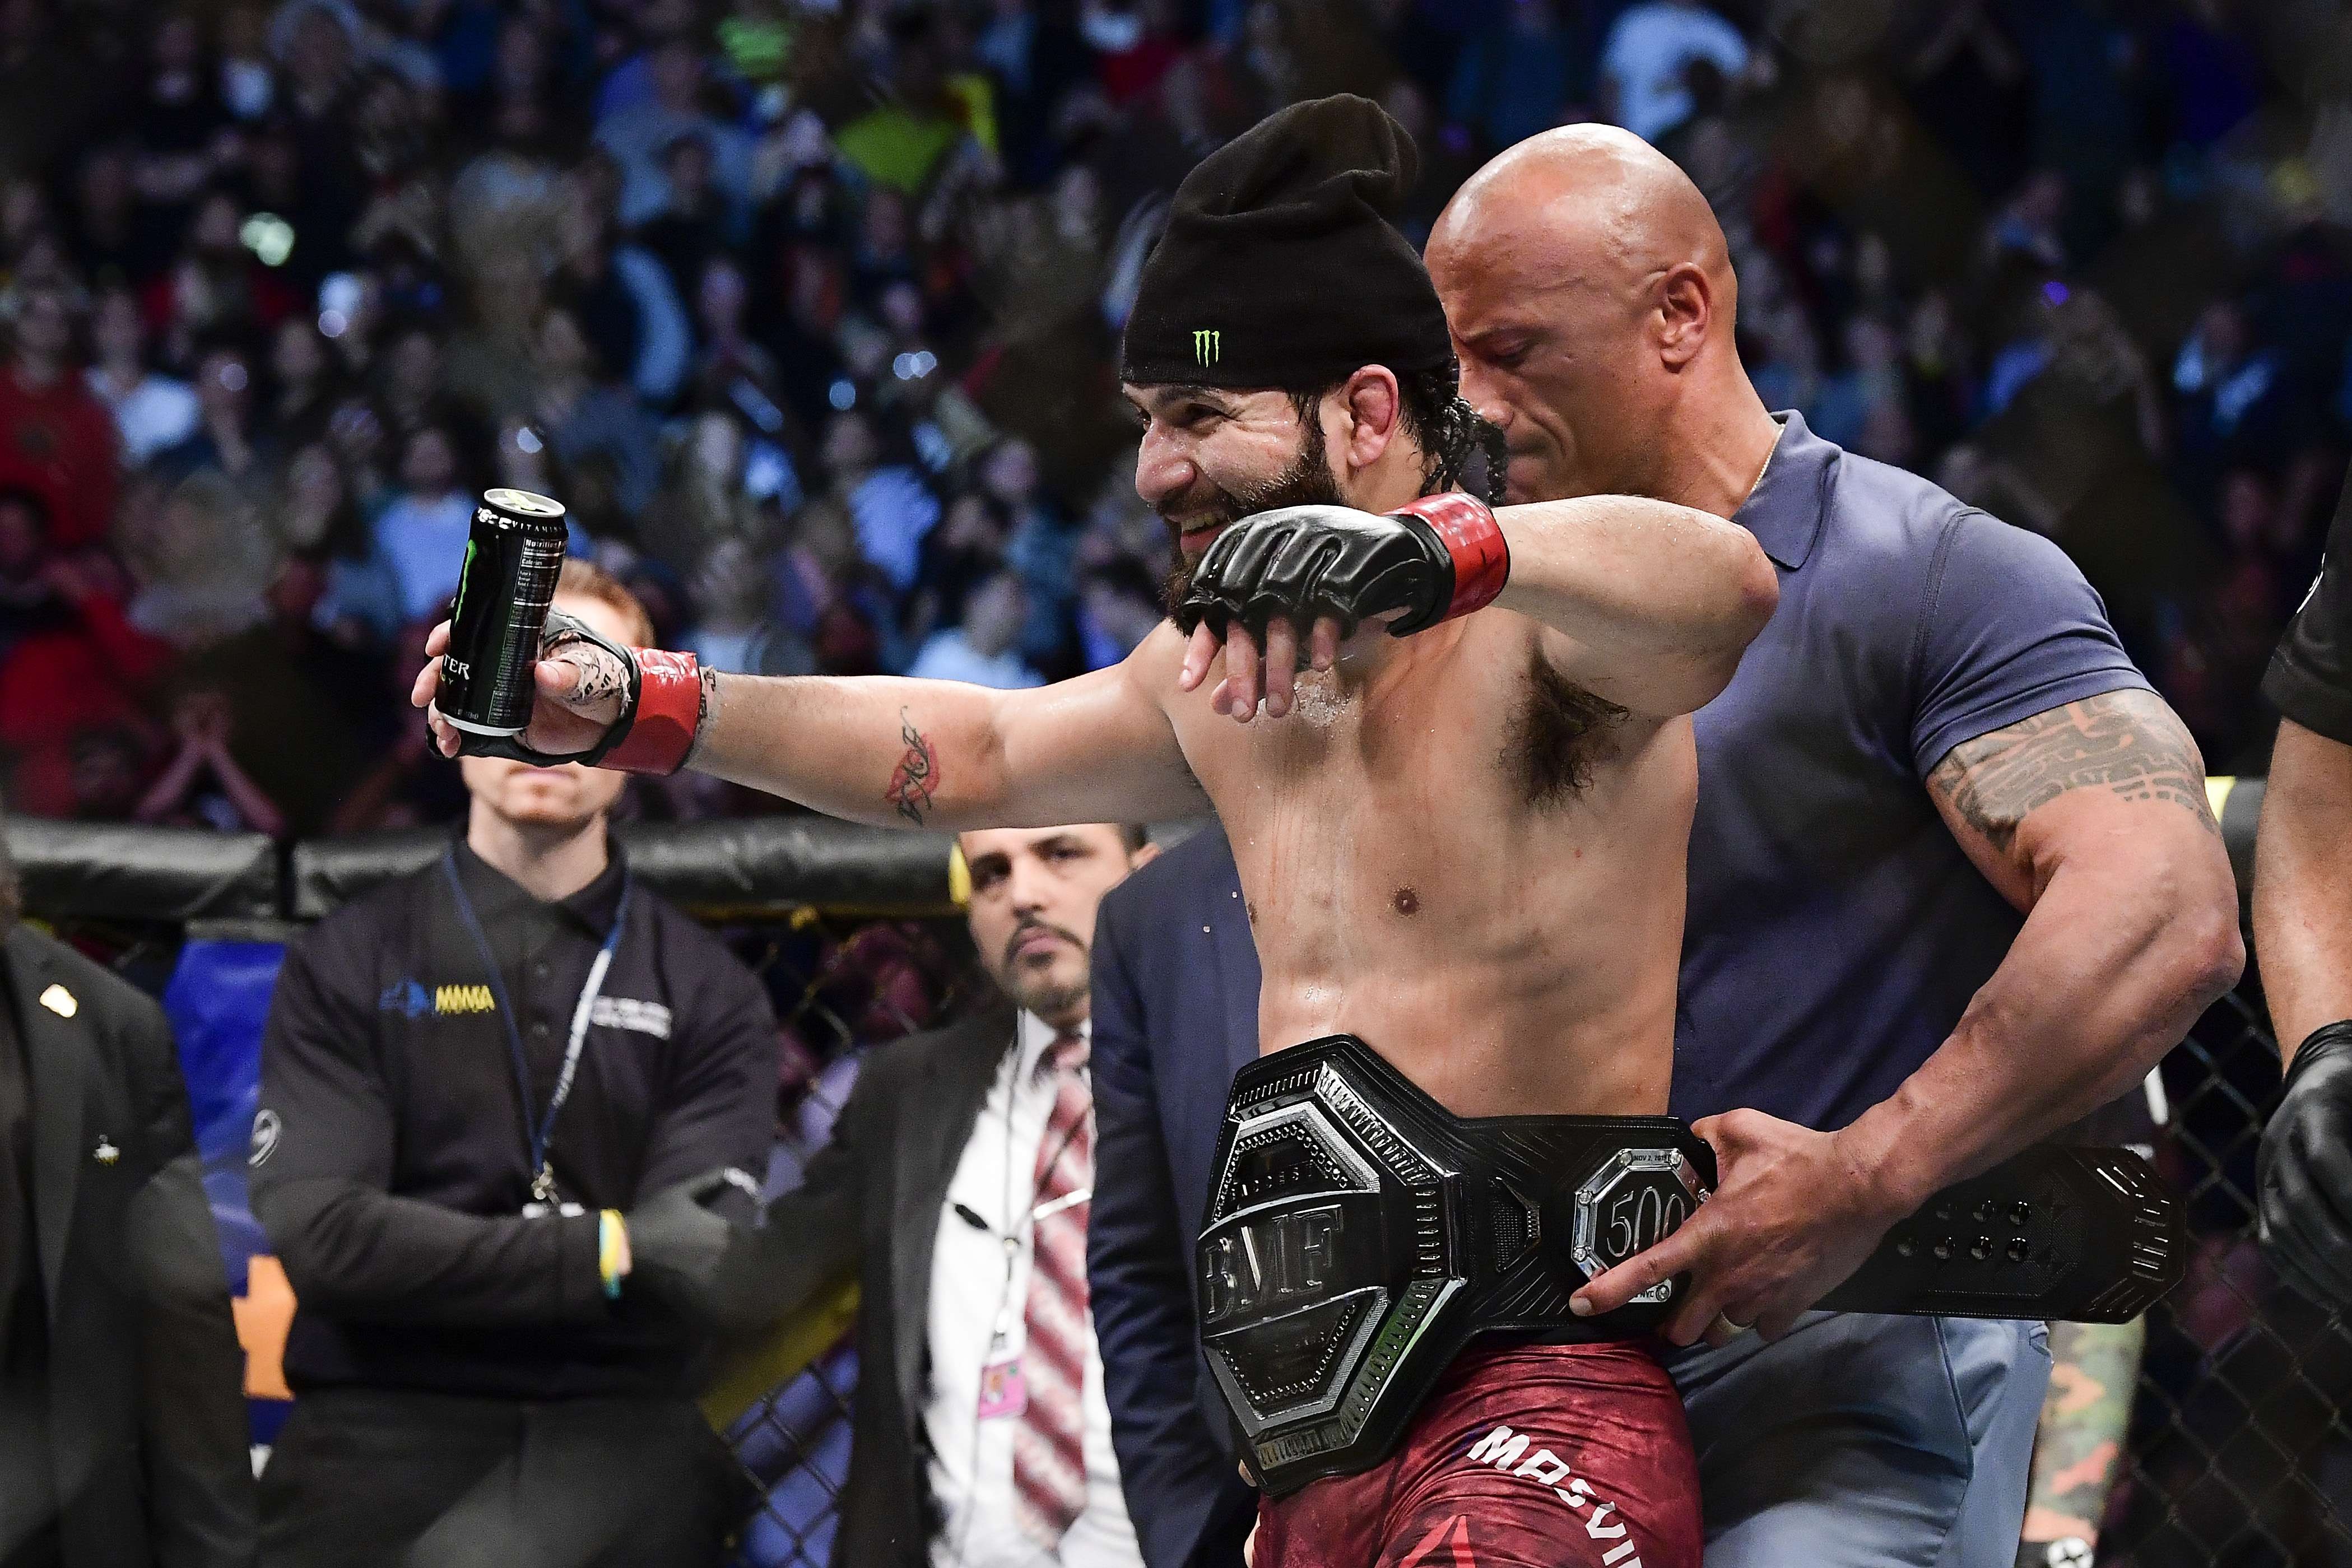 Jorge Masvidal is awarded the ‘BMF’ belt by Dwayne ‘The Rock’ Johnson after his victory by TKO on a medical stoppage against Nate Diaz. Photo: AFP